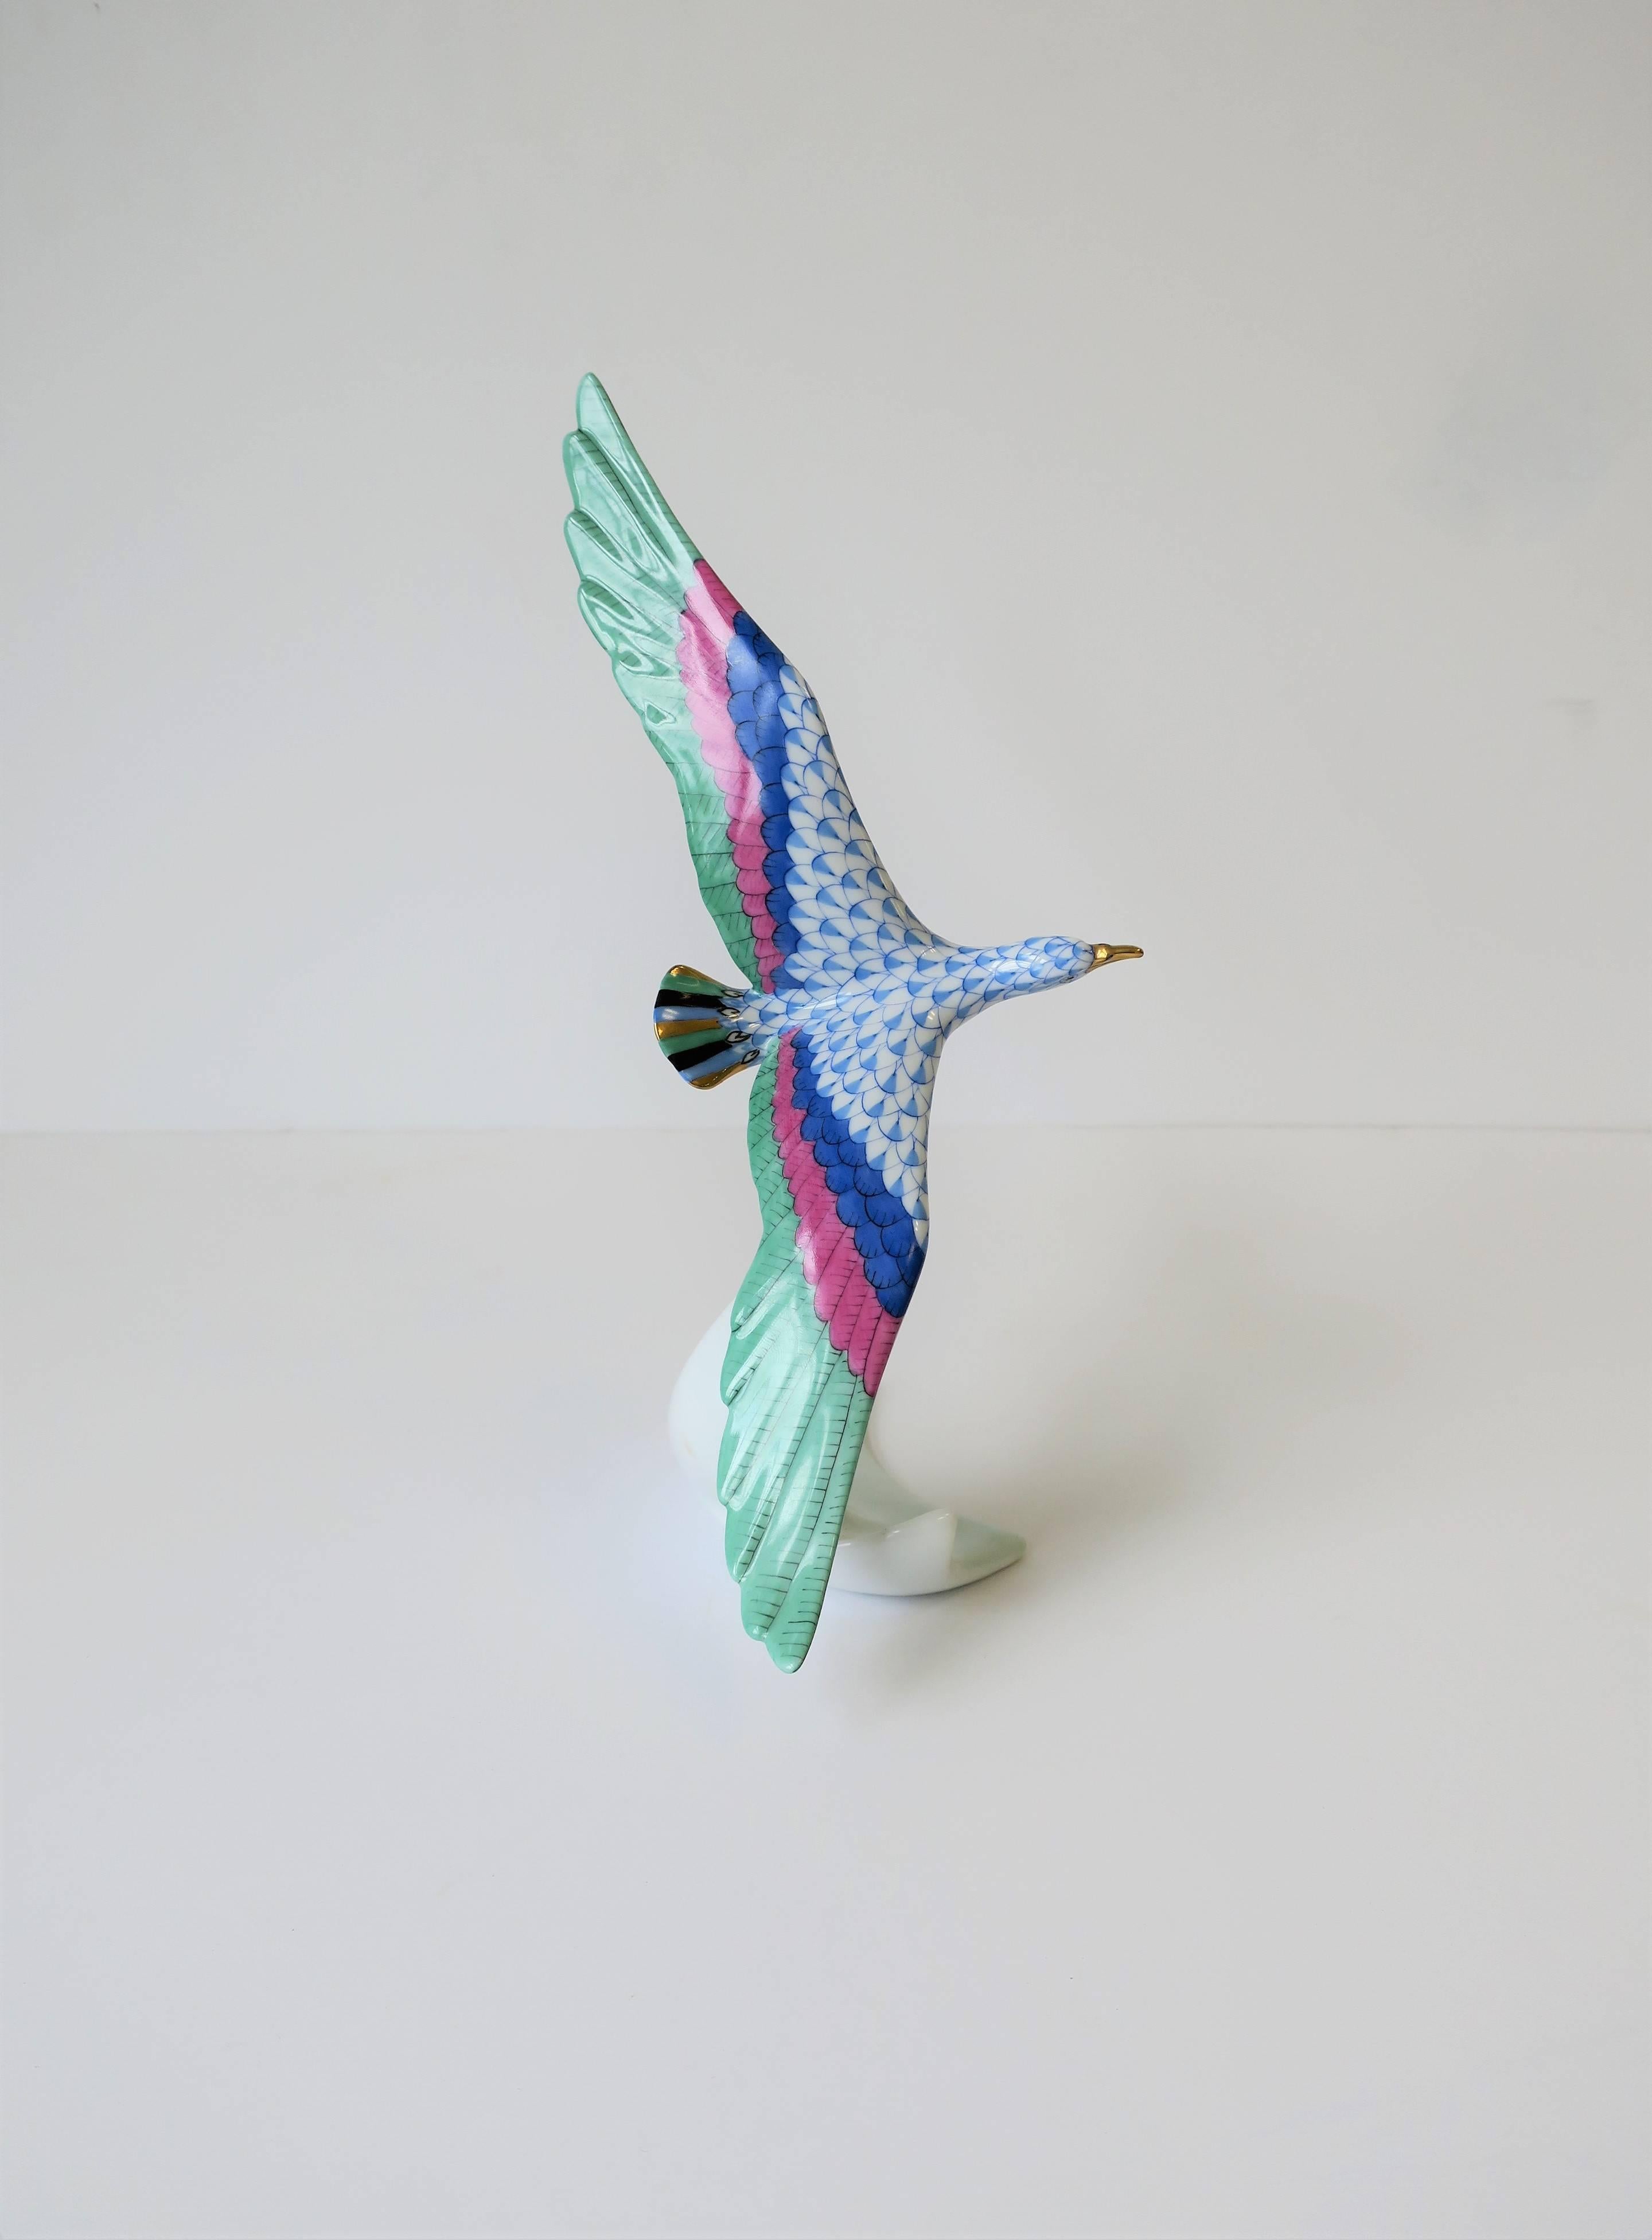 A gorgeous blue and white porcelain bird-in-flight sculpture decorative object by luxury maker, Herend, from Hungary. Bird bears the beautiful iconic Herend pattern on body, detailed gold accent on birds bill and feet, and black and gold on tail.